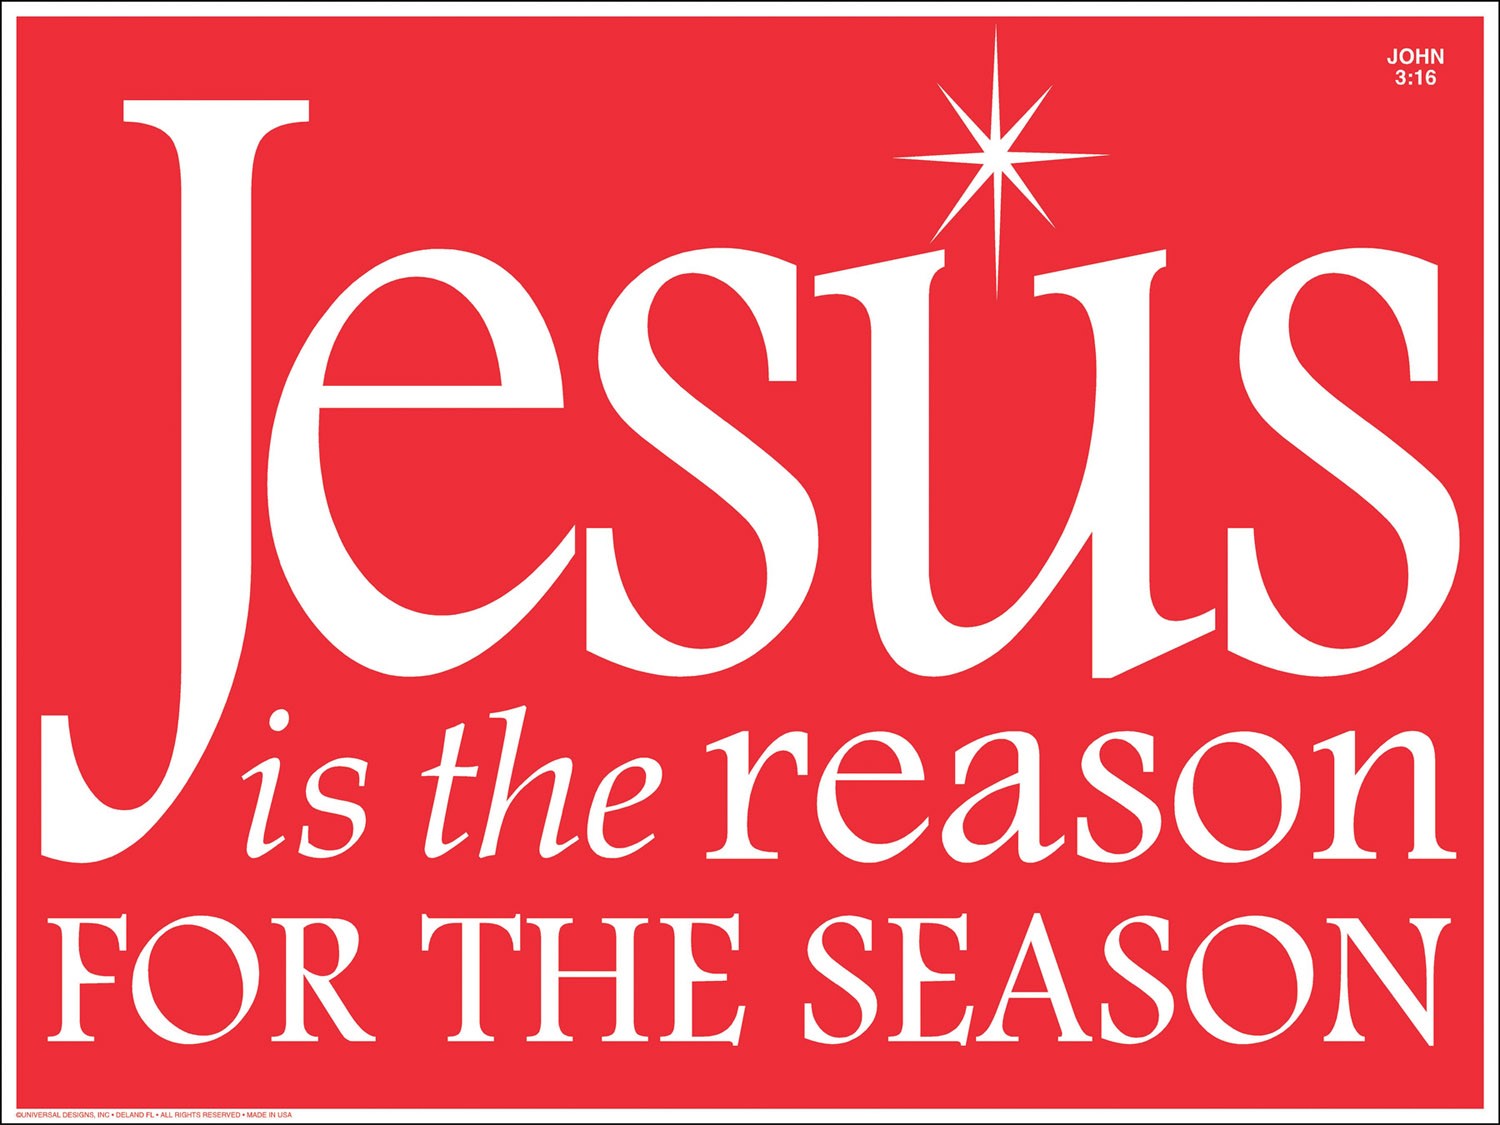 clip art for jesus is the reason for the season - photo #40